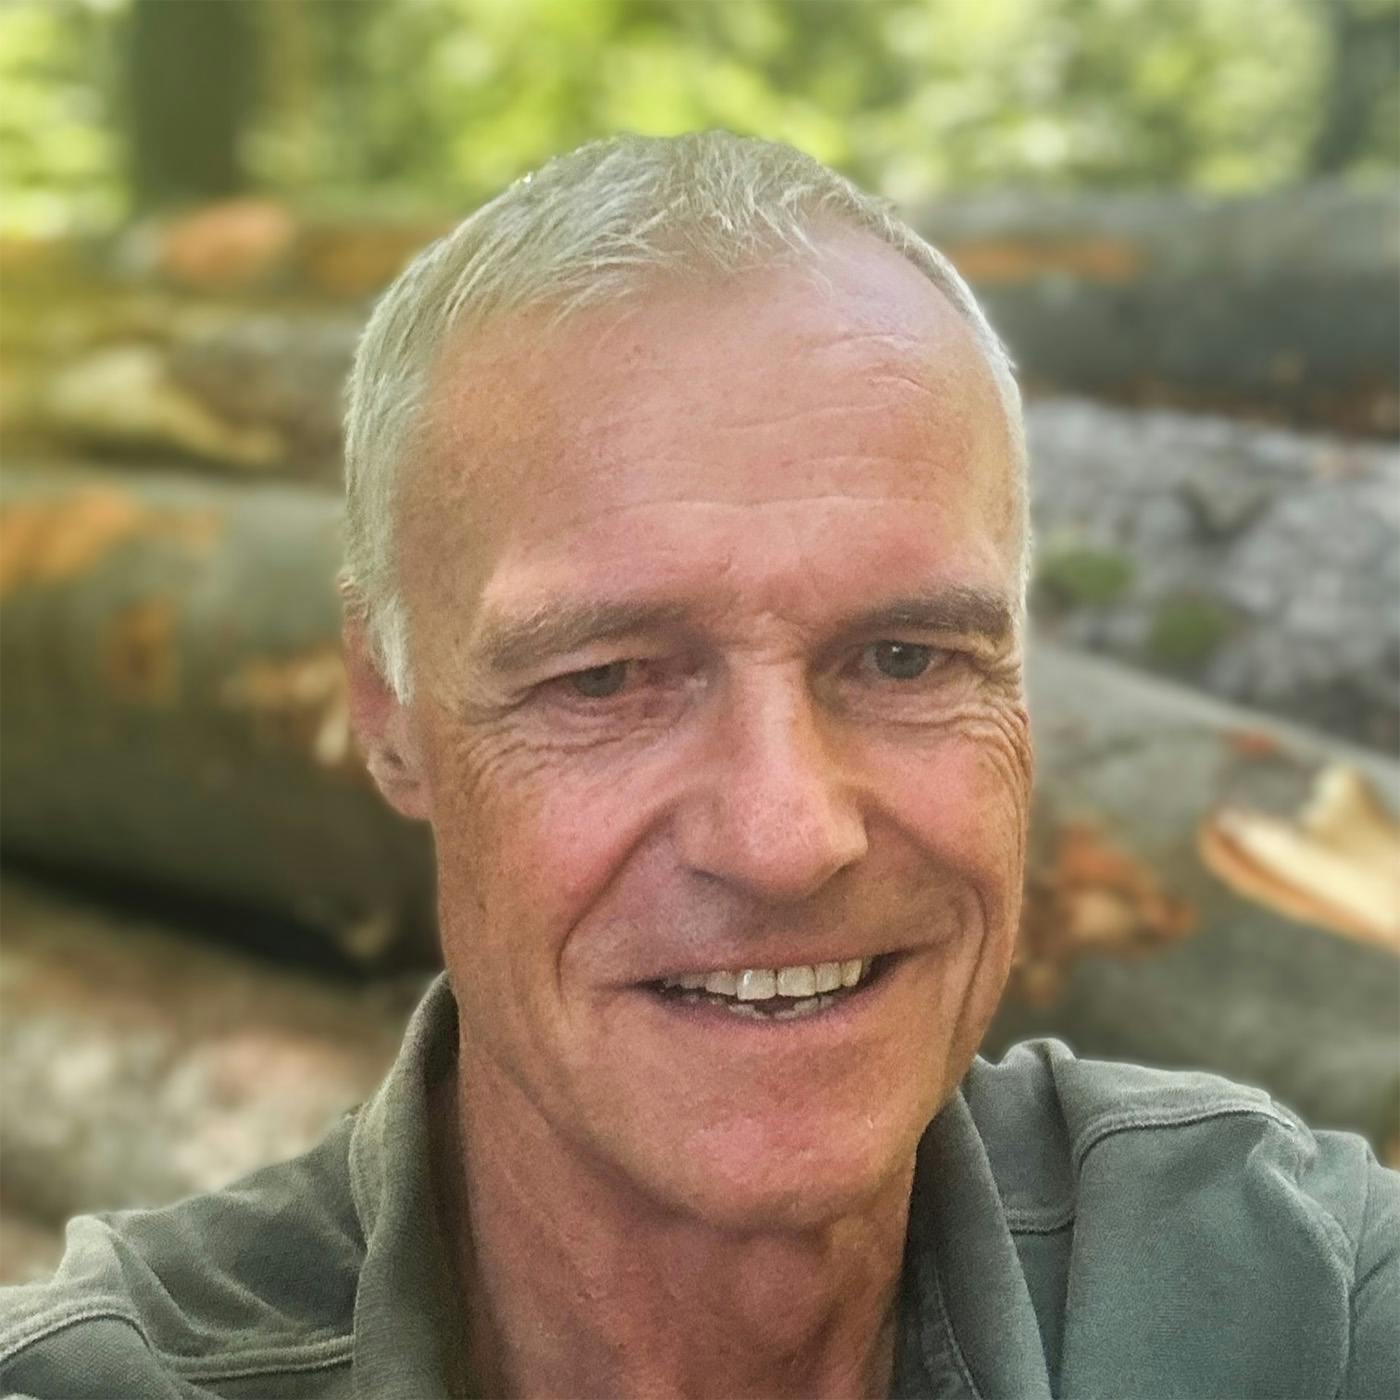 Profile picture of Armin Elbs a forest administrator 